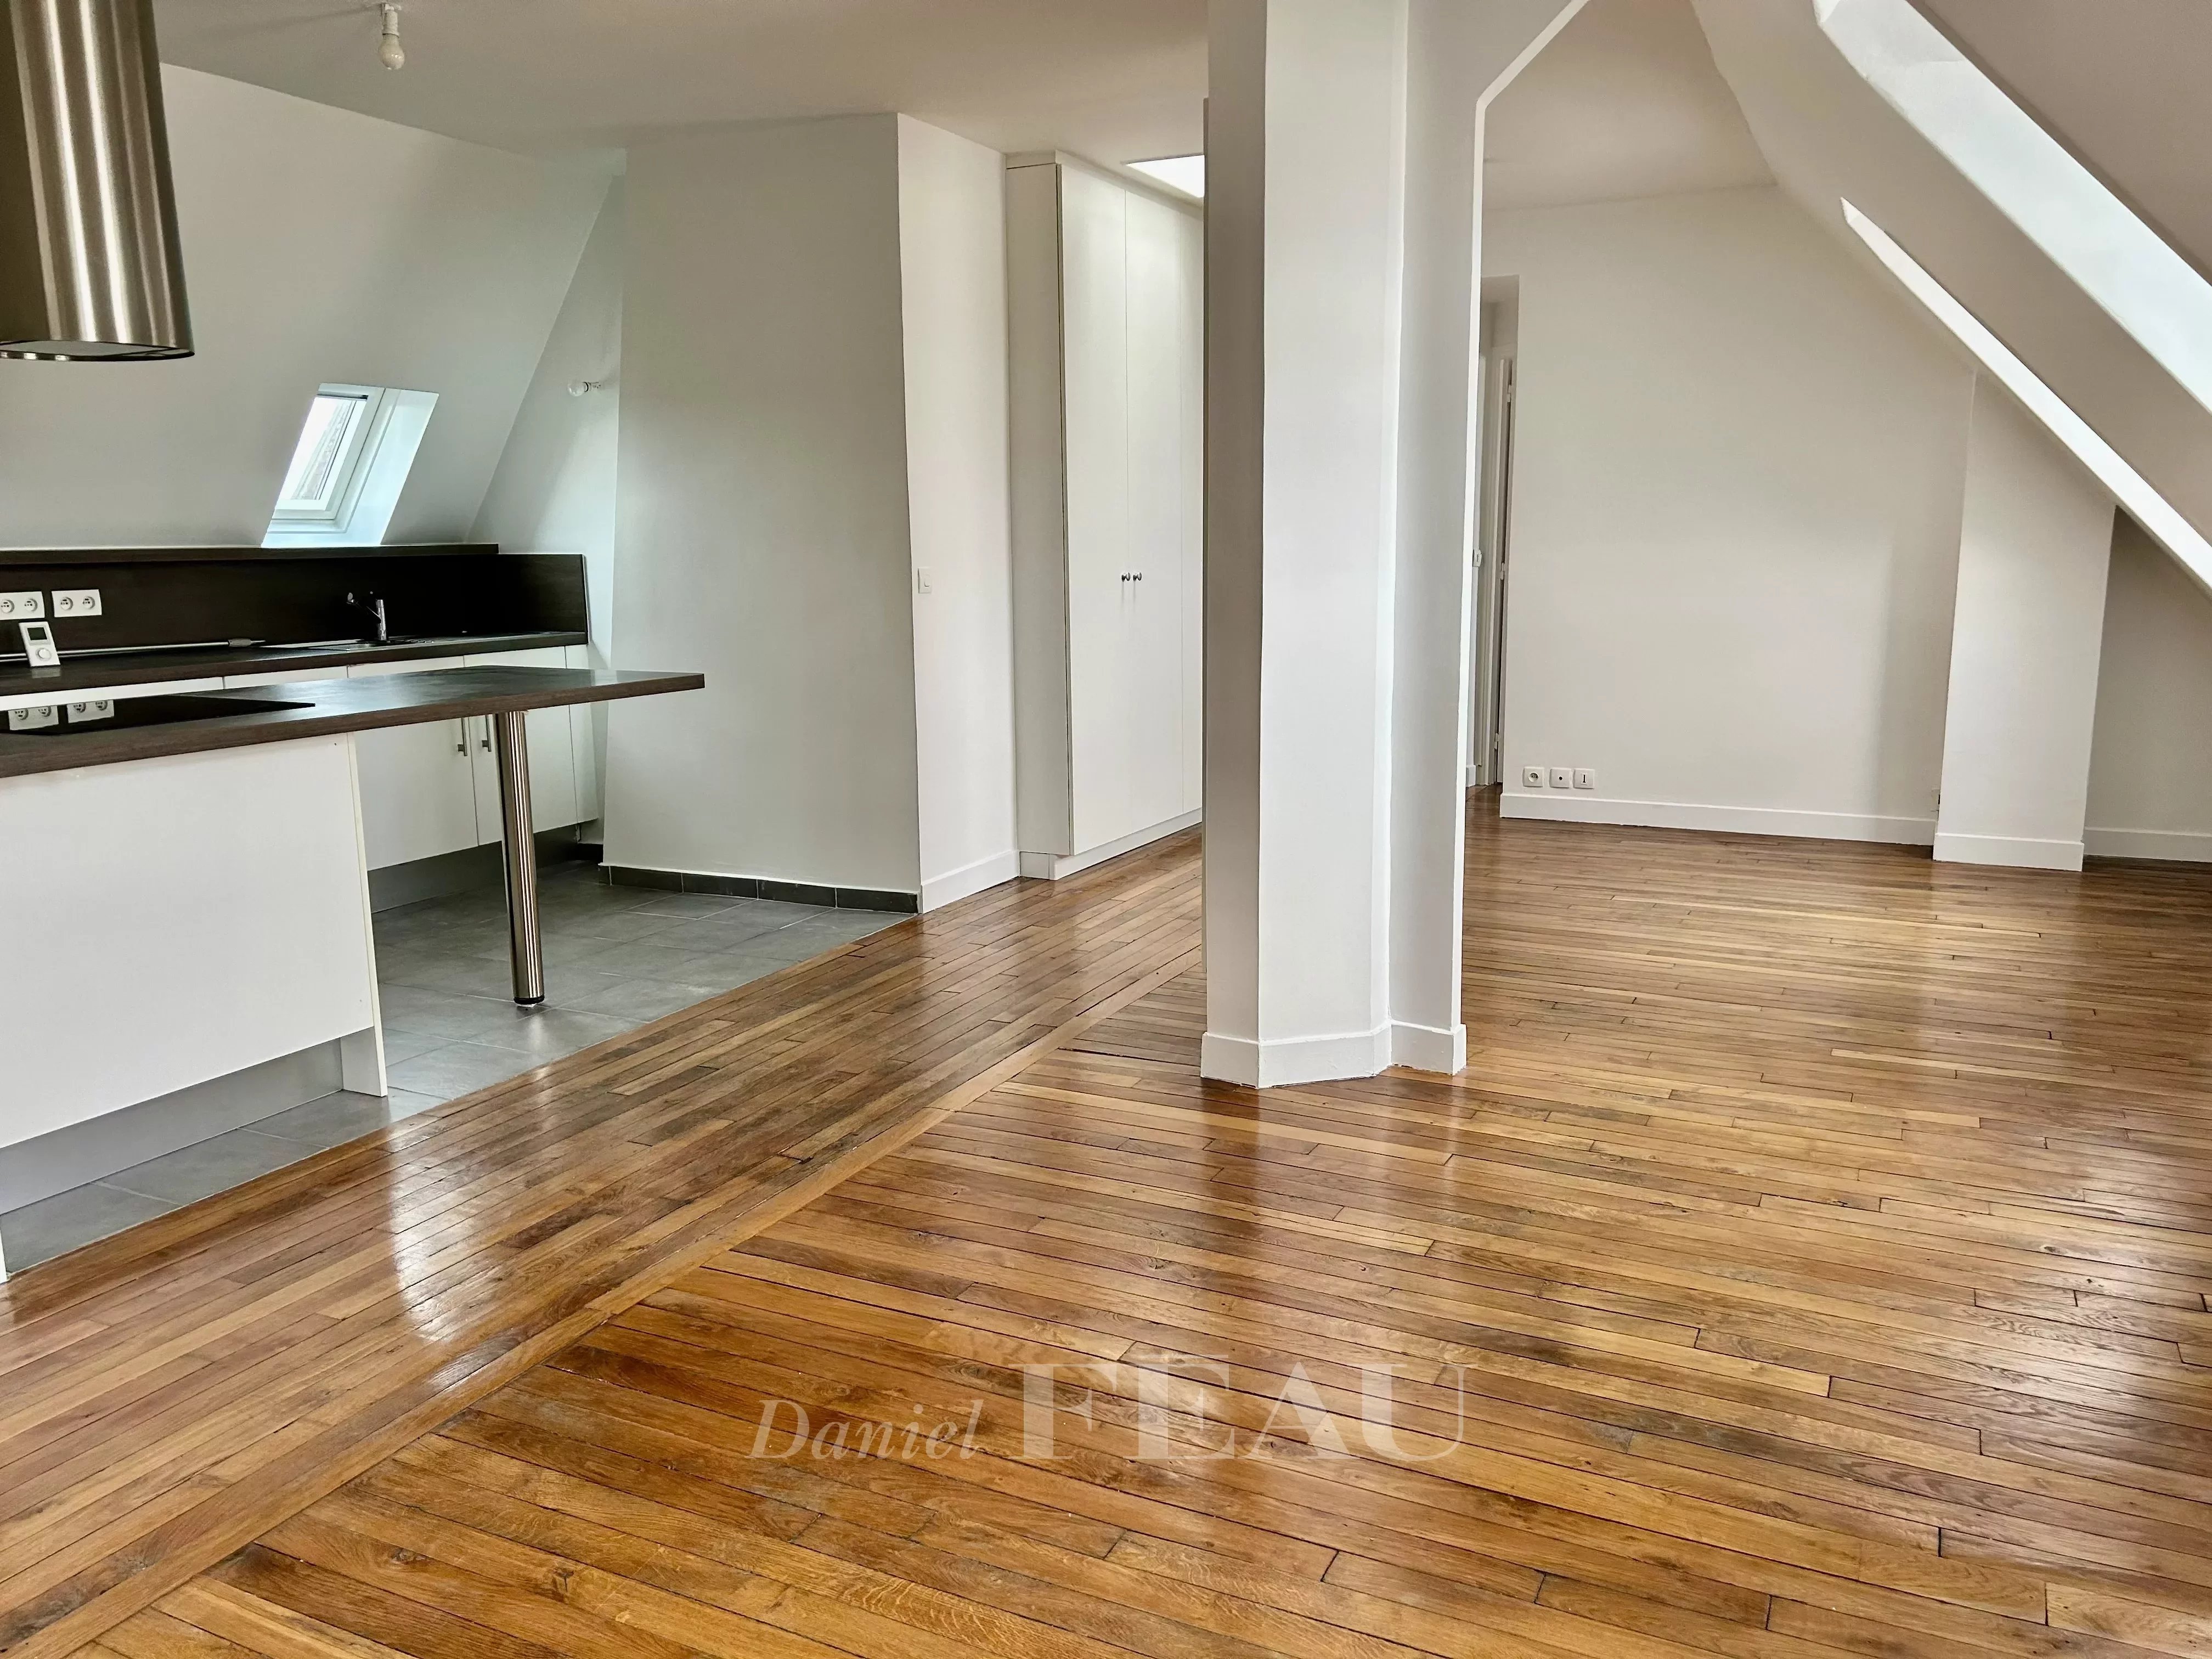 Levallois – A 2-bed apartment